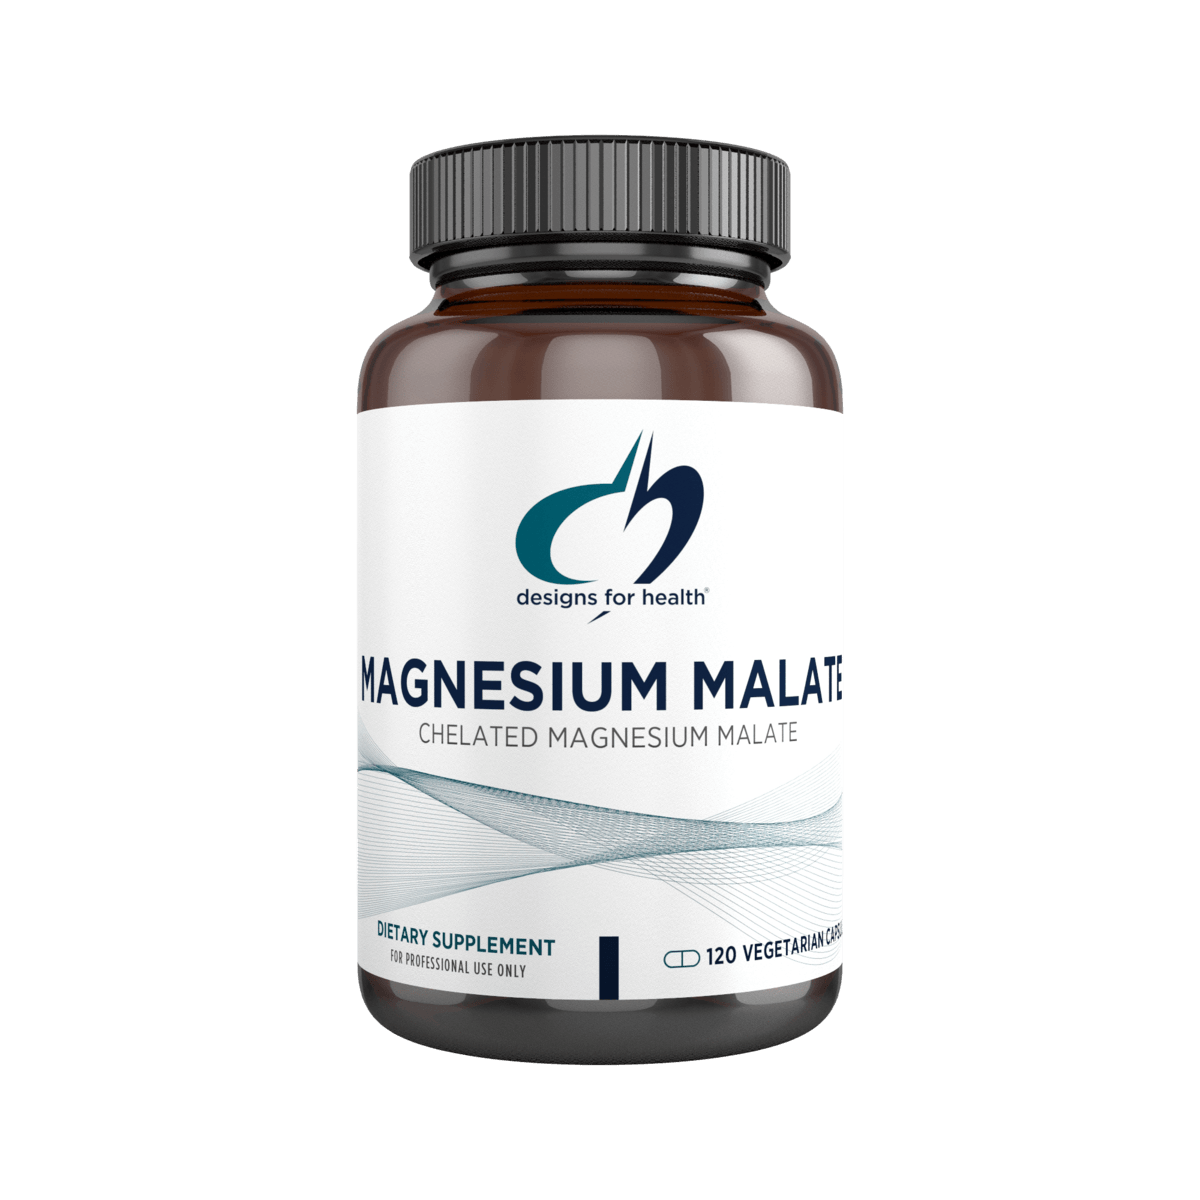 Magnesium Malate Design for Health (DFH) in New Zealand